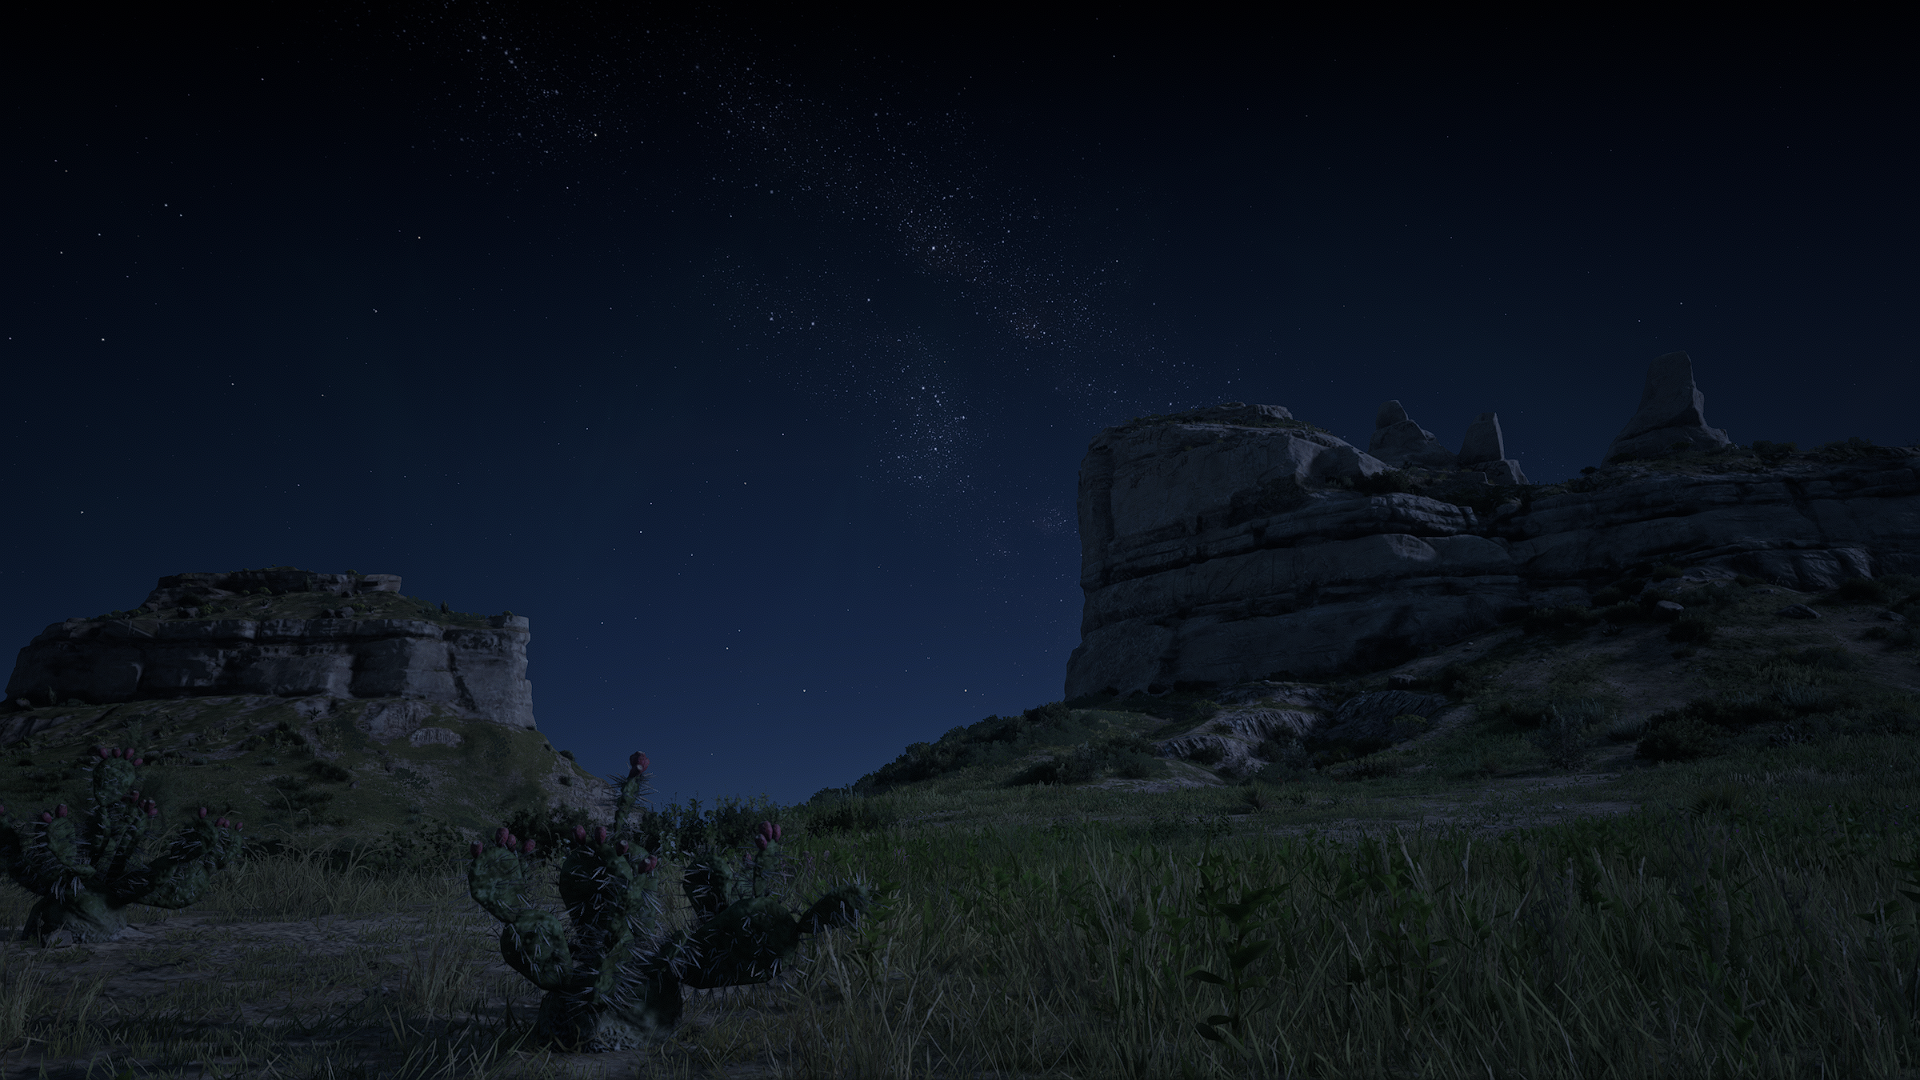 General 1920x1080 Red Dead Redemption 2 night moonlight nature landscape spoilers screen shot cliff stars foliage